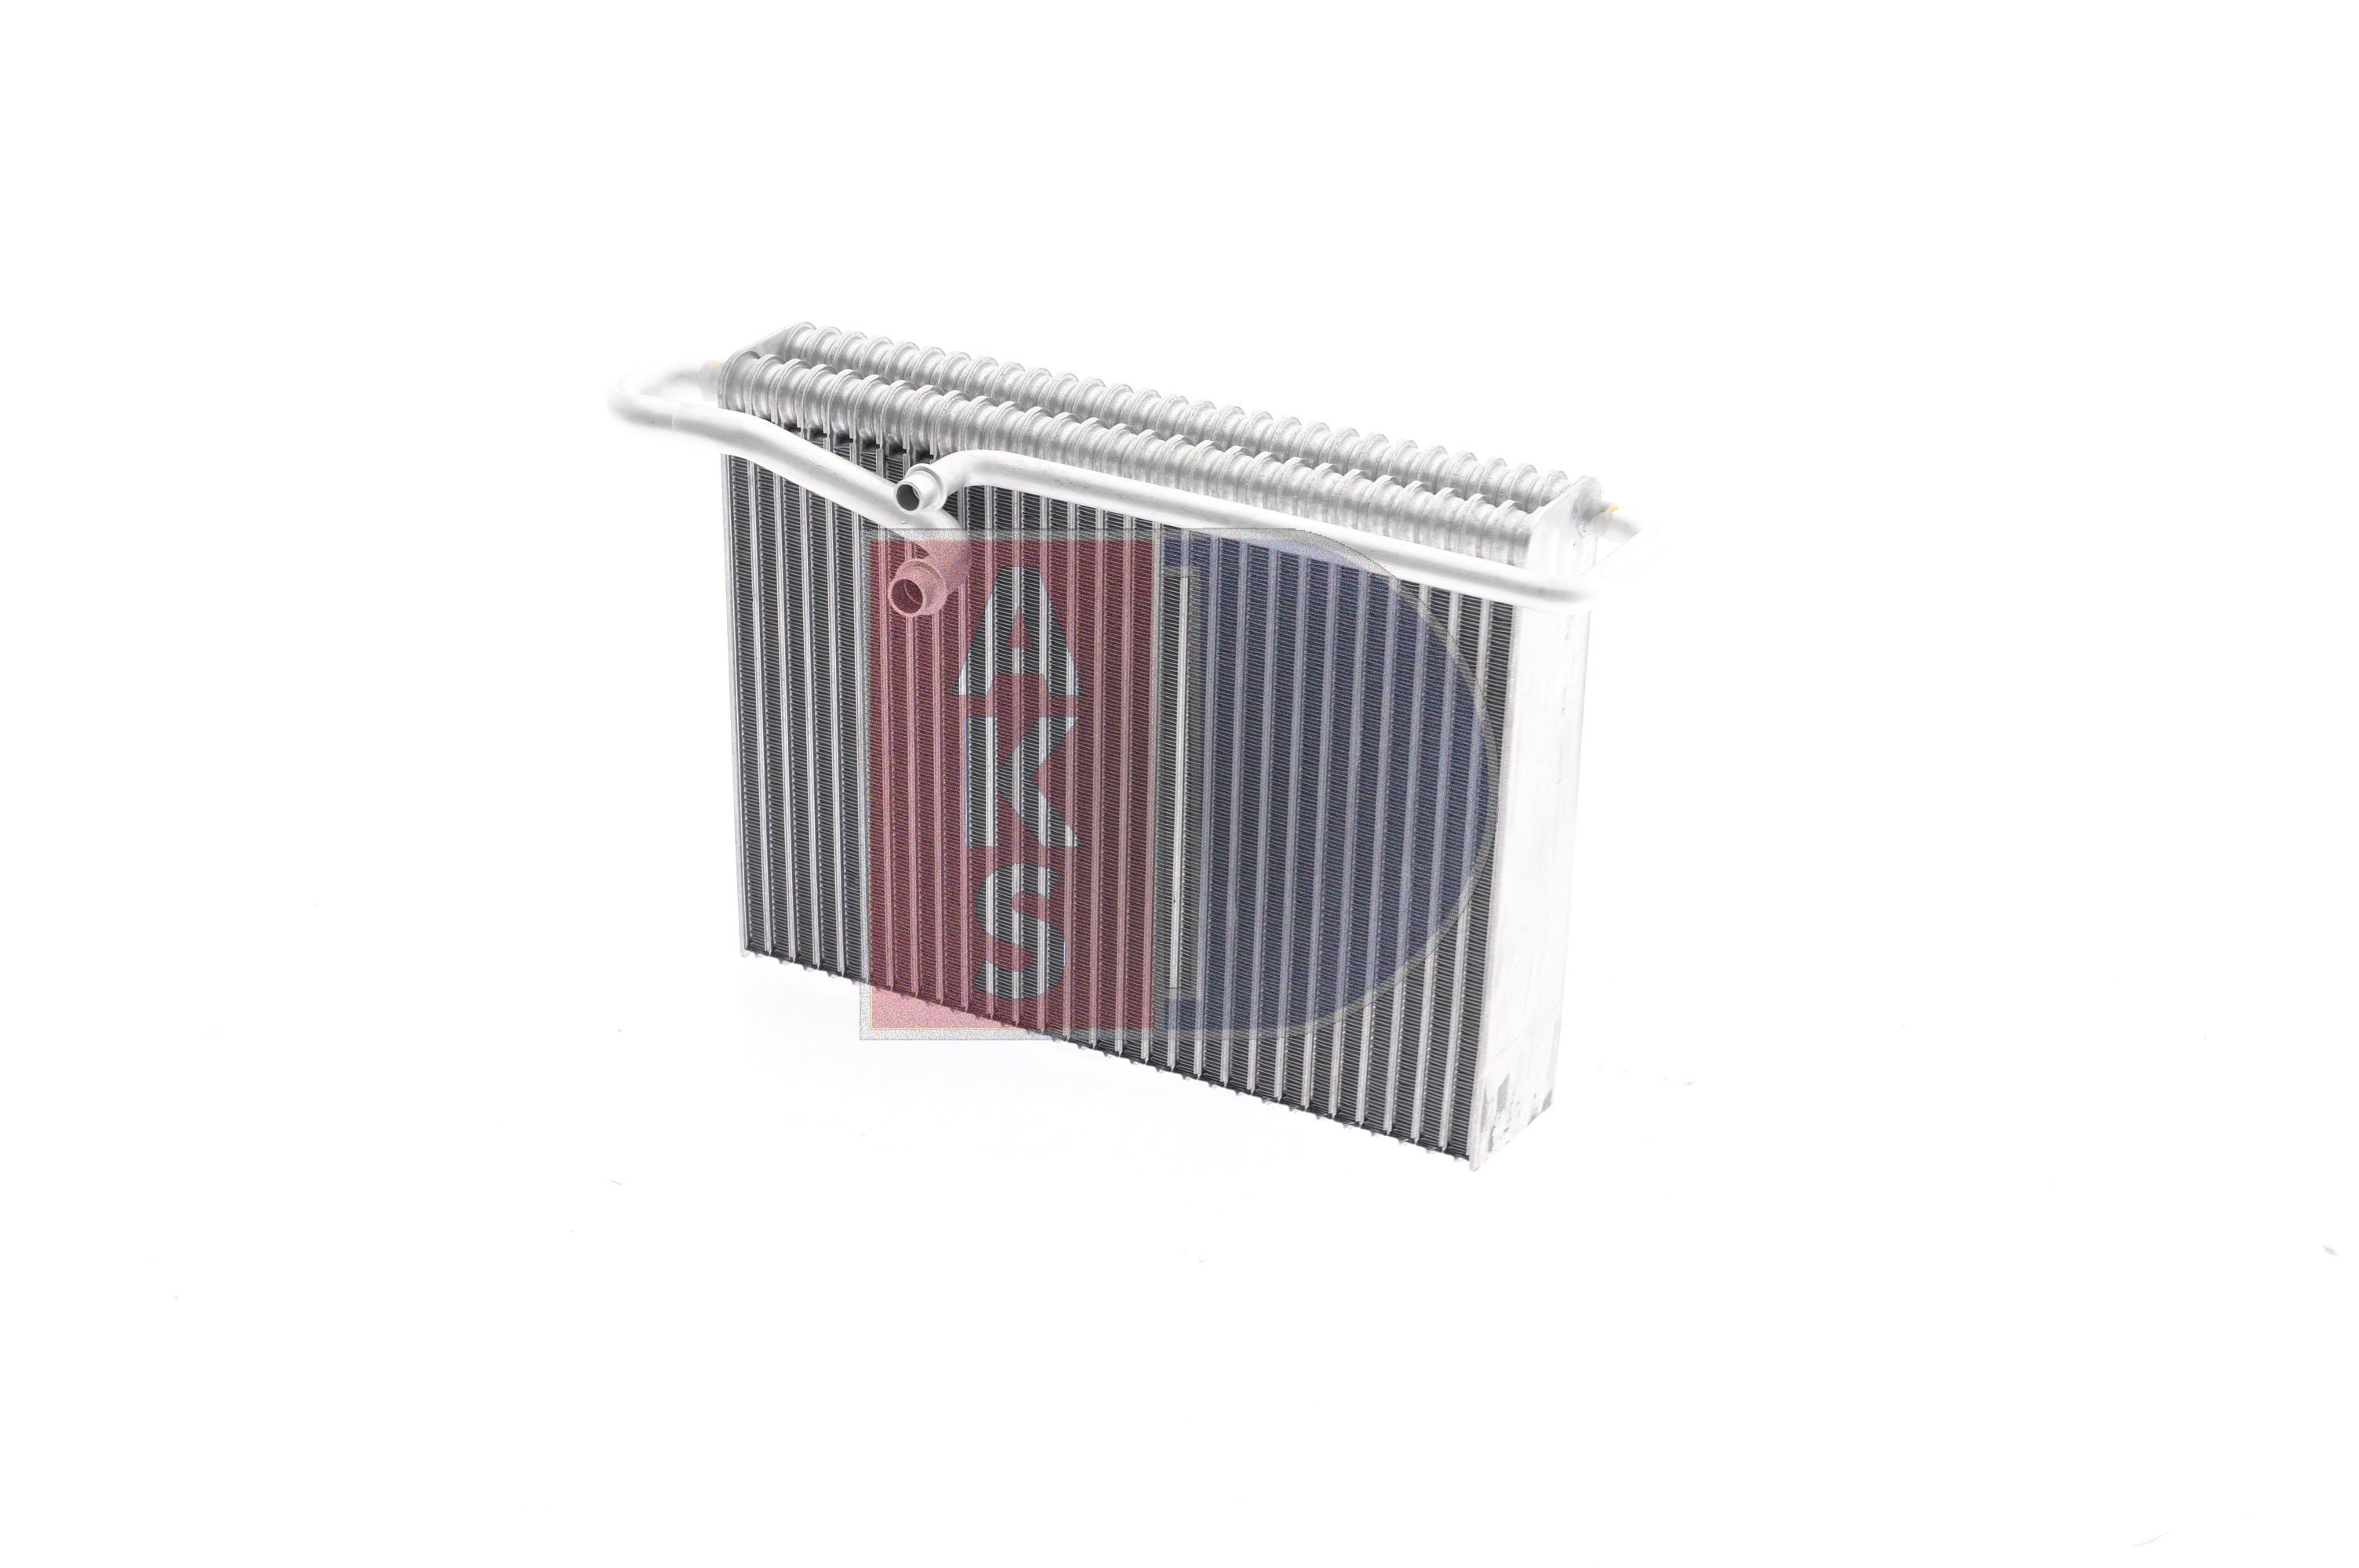 Volvo Air conditioning evaporator AKS DASIS 820324N at a good price